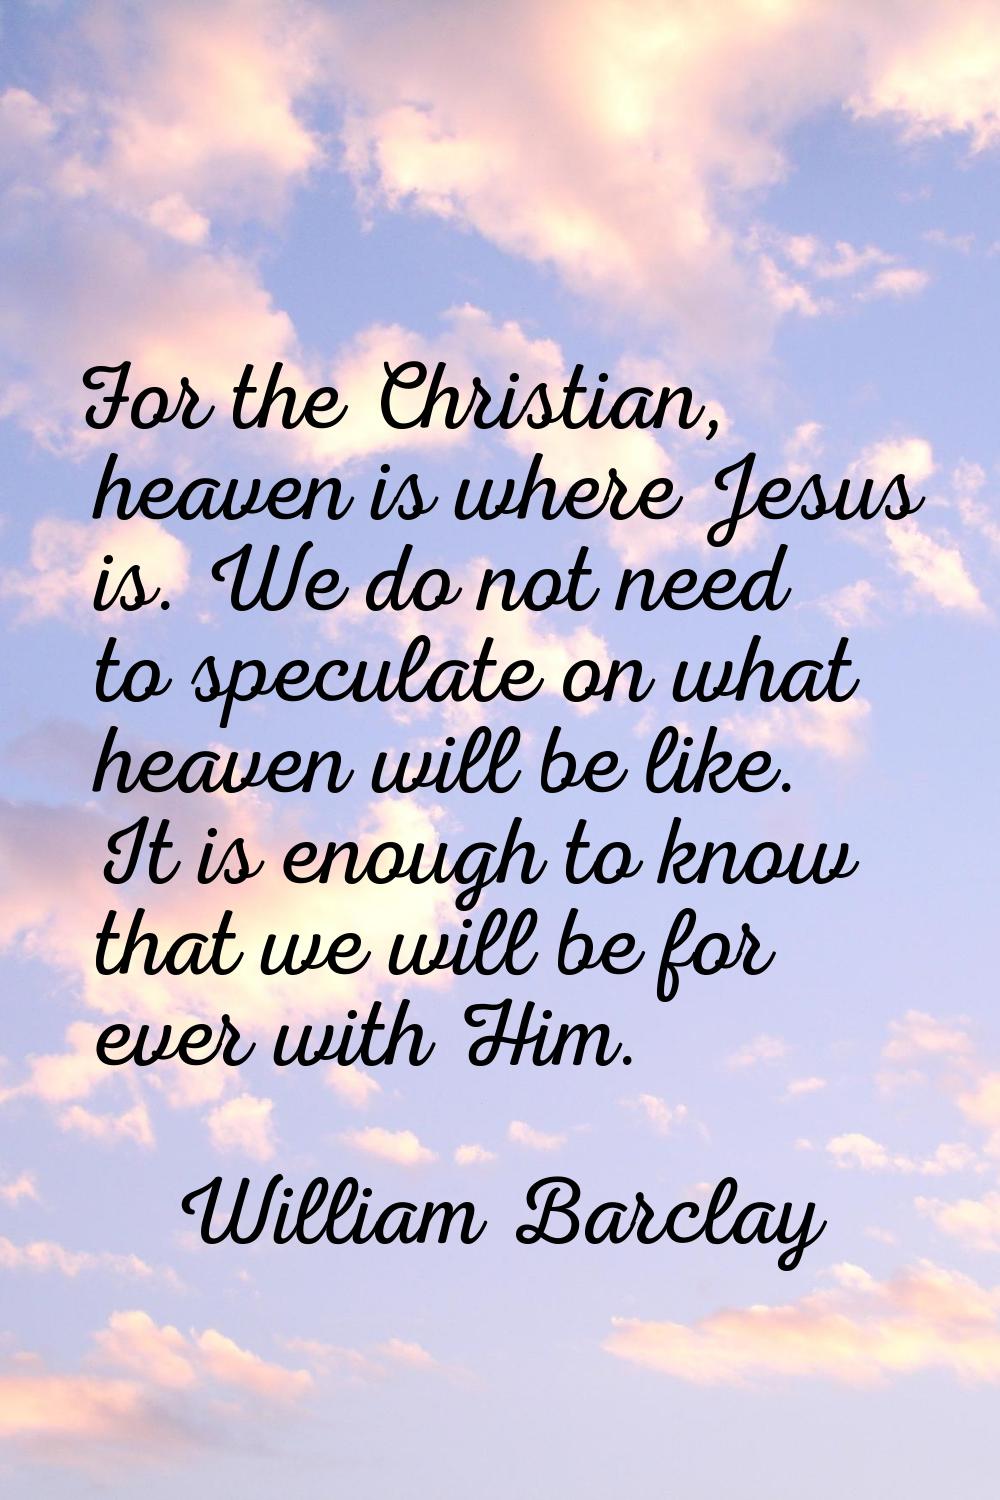 For the Christian, heaven is where Jesus is. We do not need to speculate on what heaven will be lik